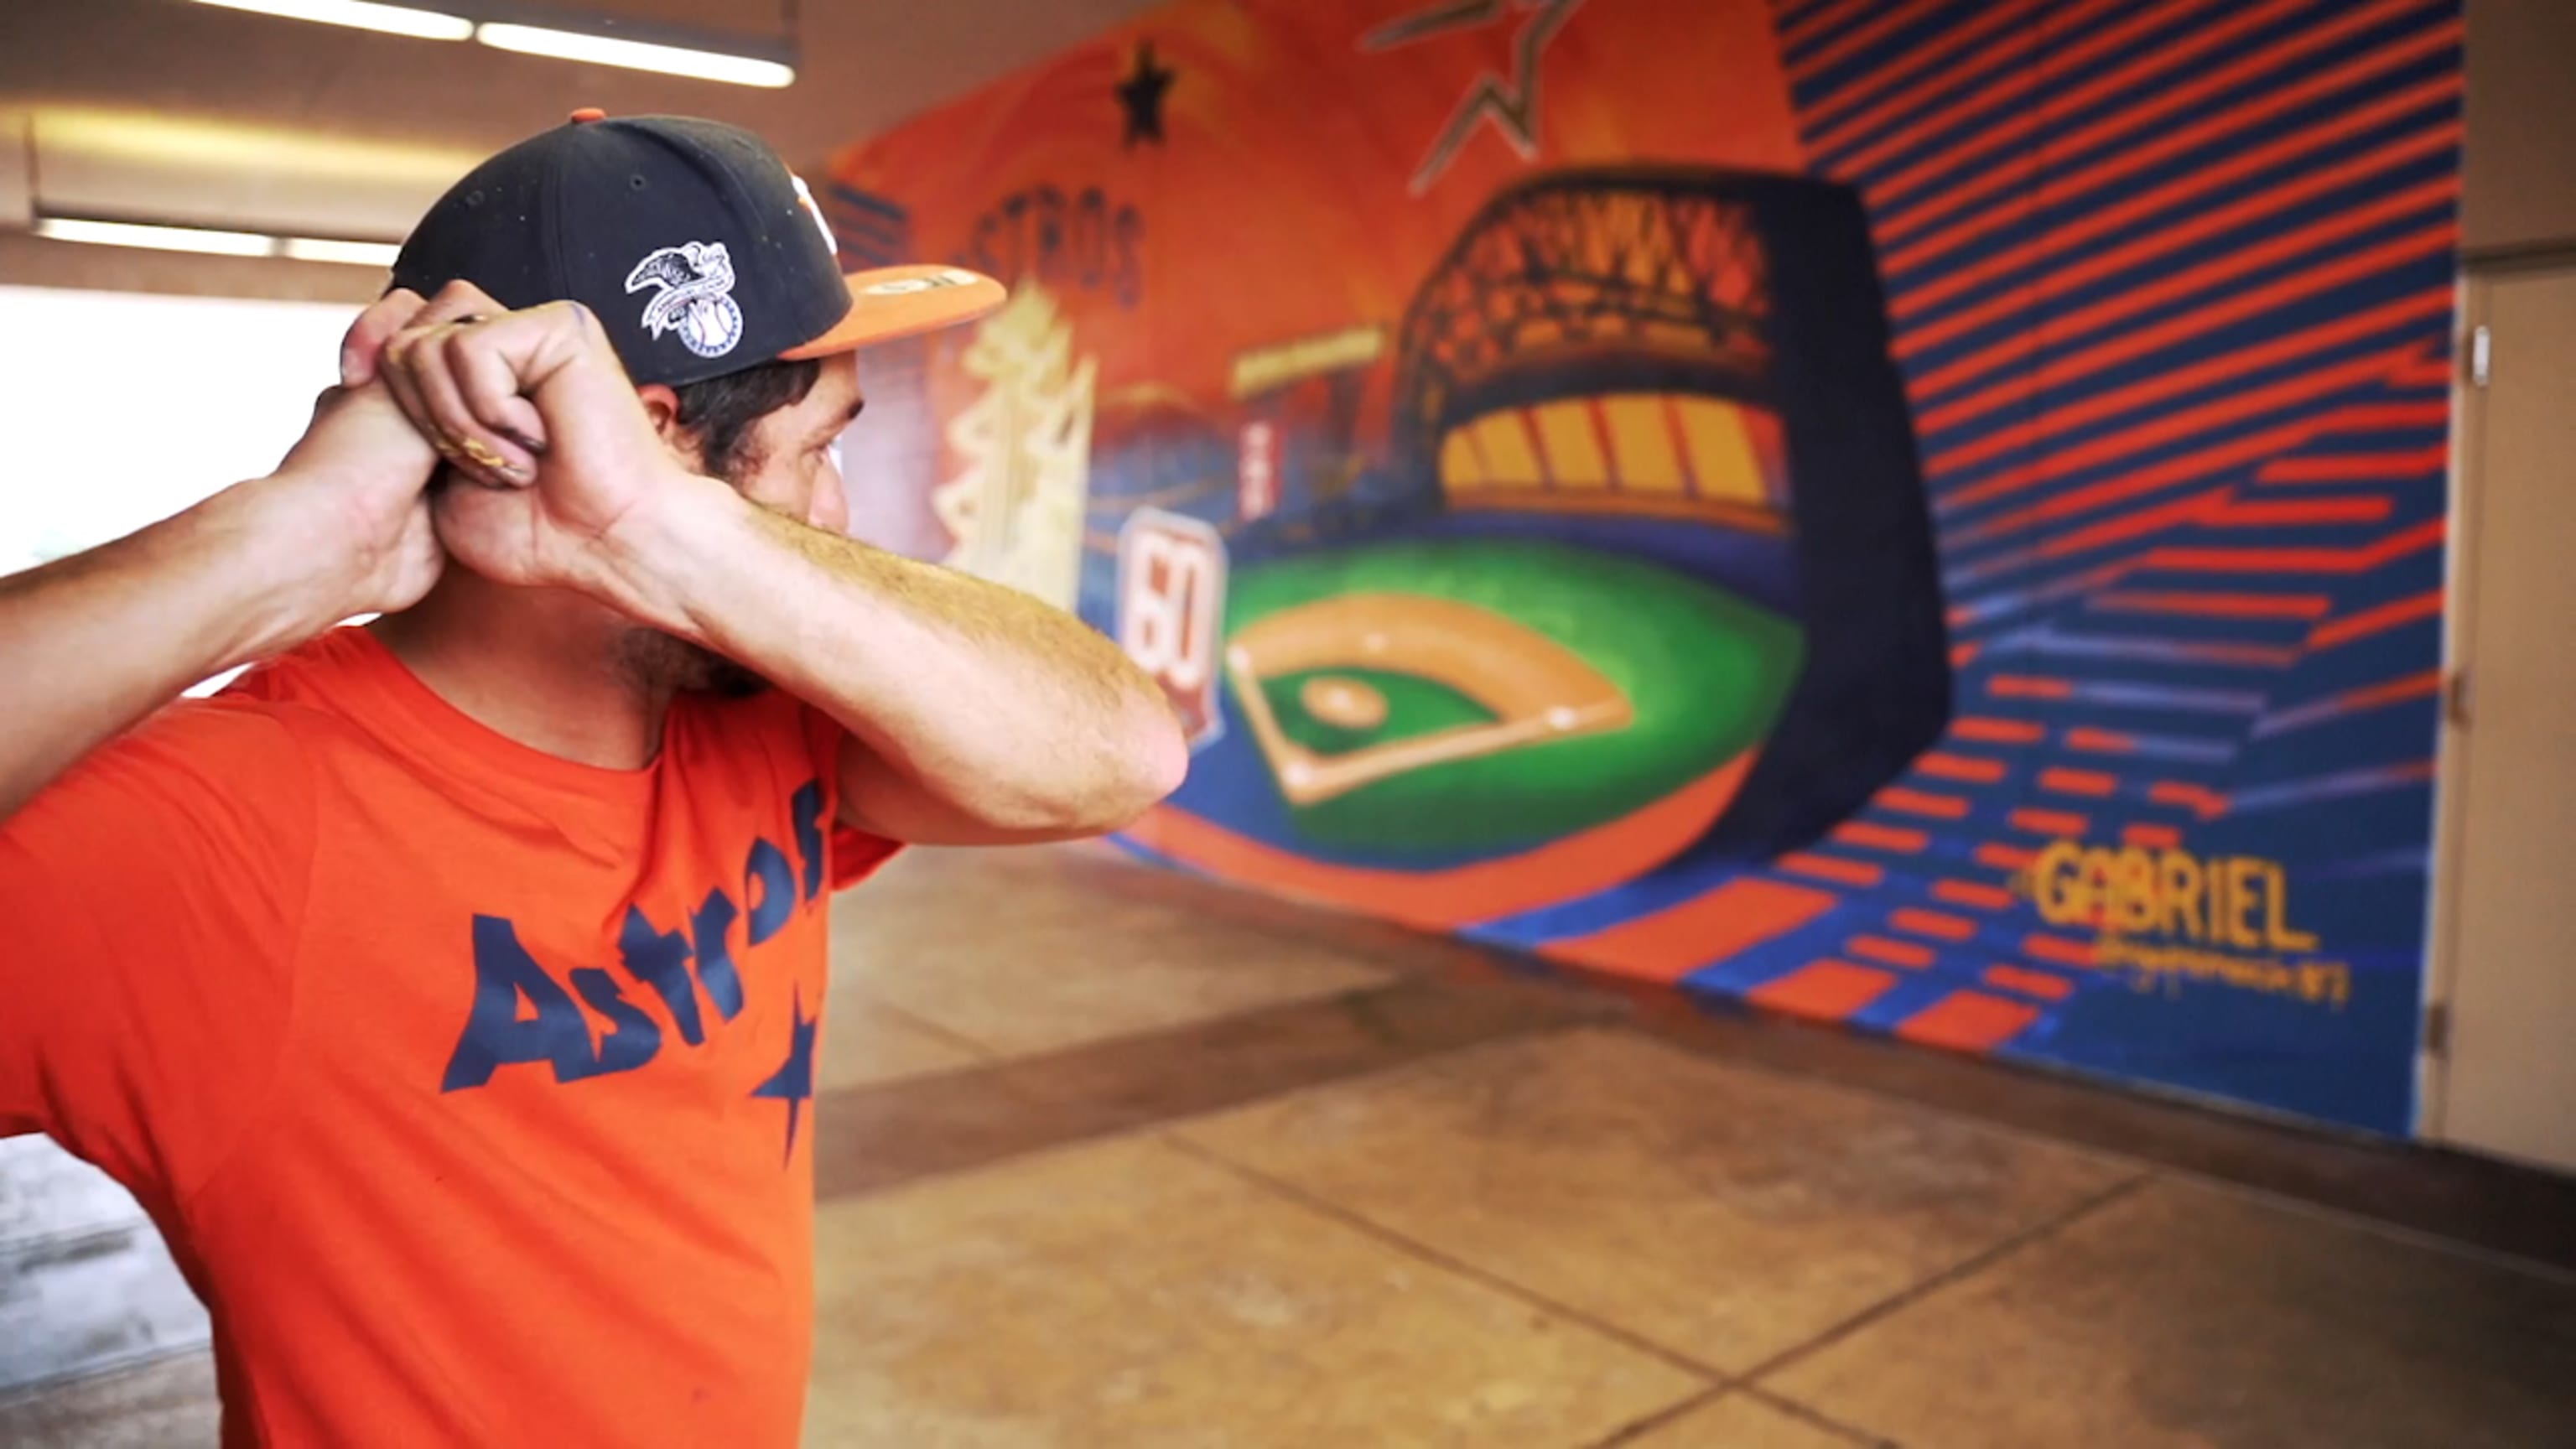 Houston Astros: Artists collaborate to paint 60th anniversary mural  revealed during annual FanFest - ABC13 Houston